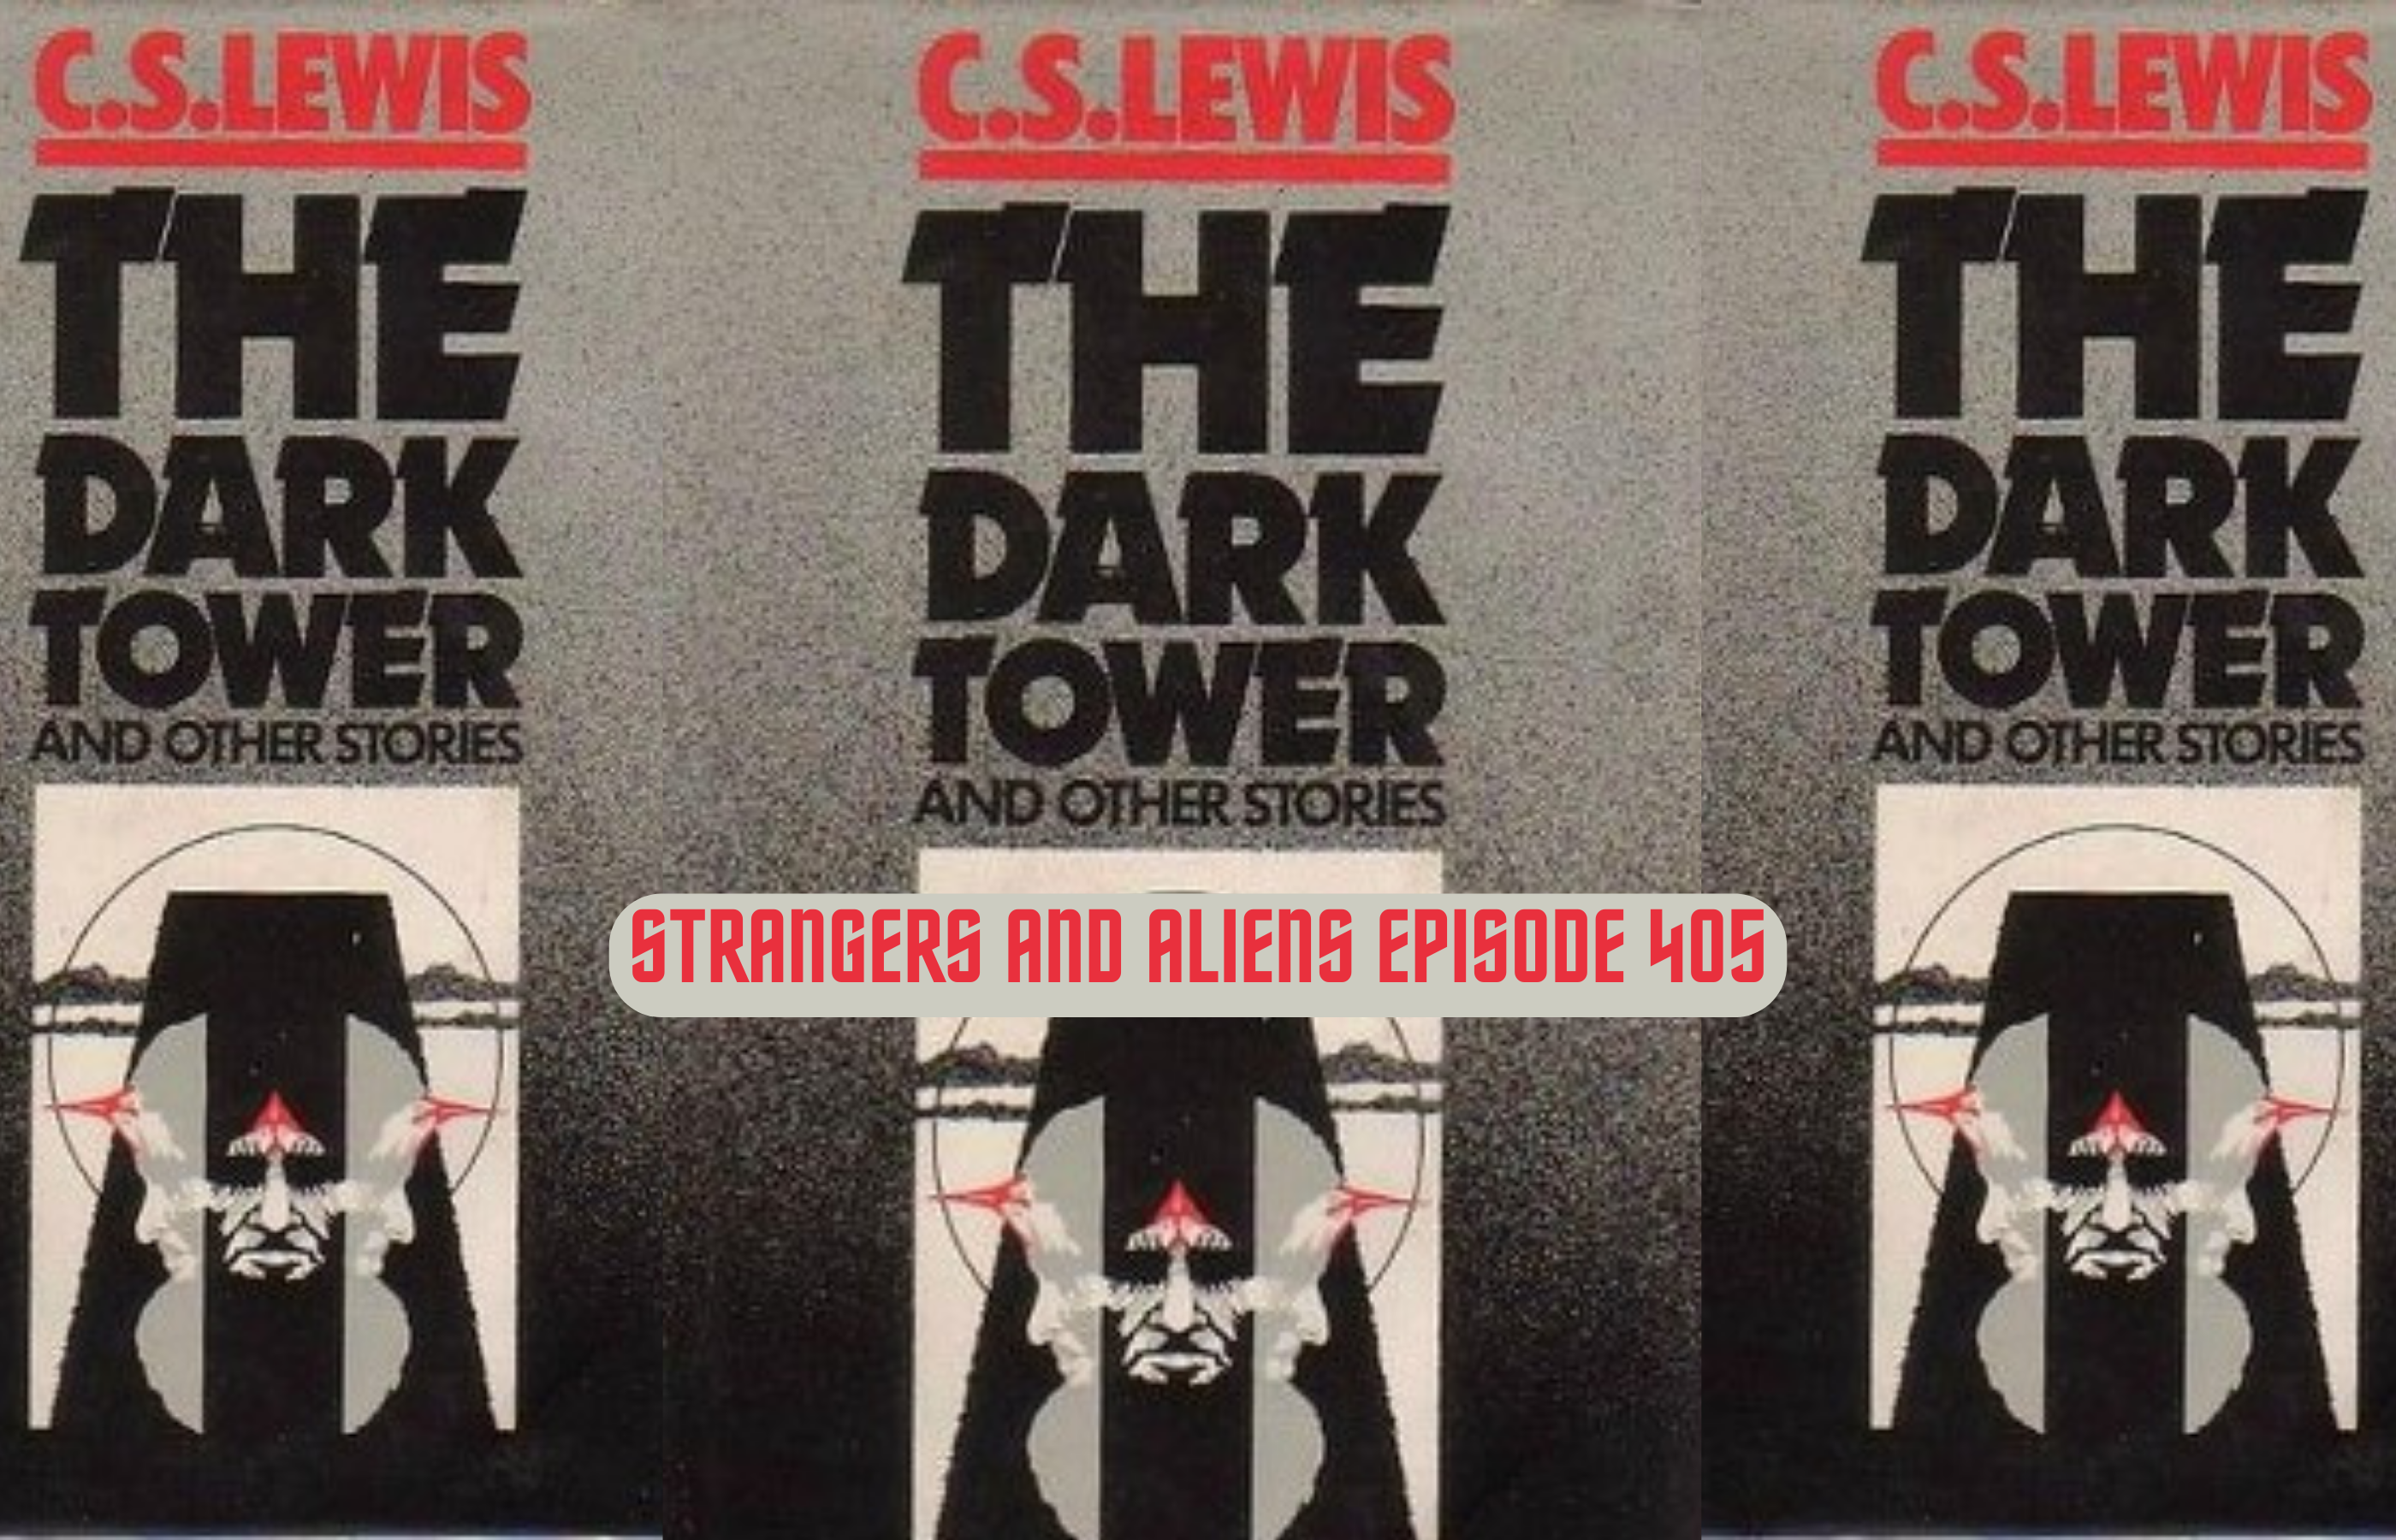 THE DARK TOWER (C.S. Lewis’ Space Trilogy Part 4) – SA405